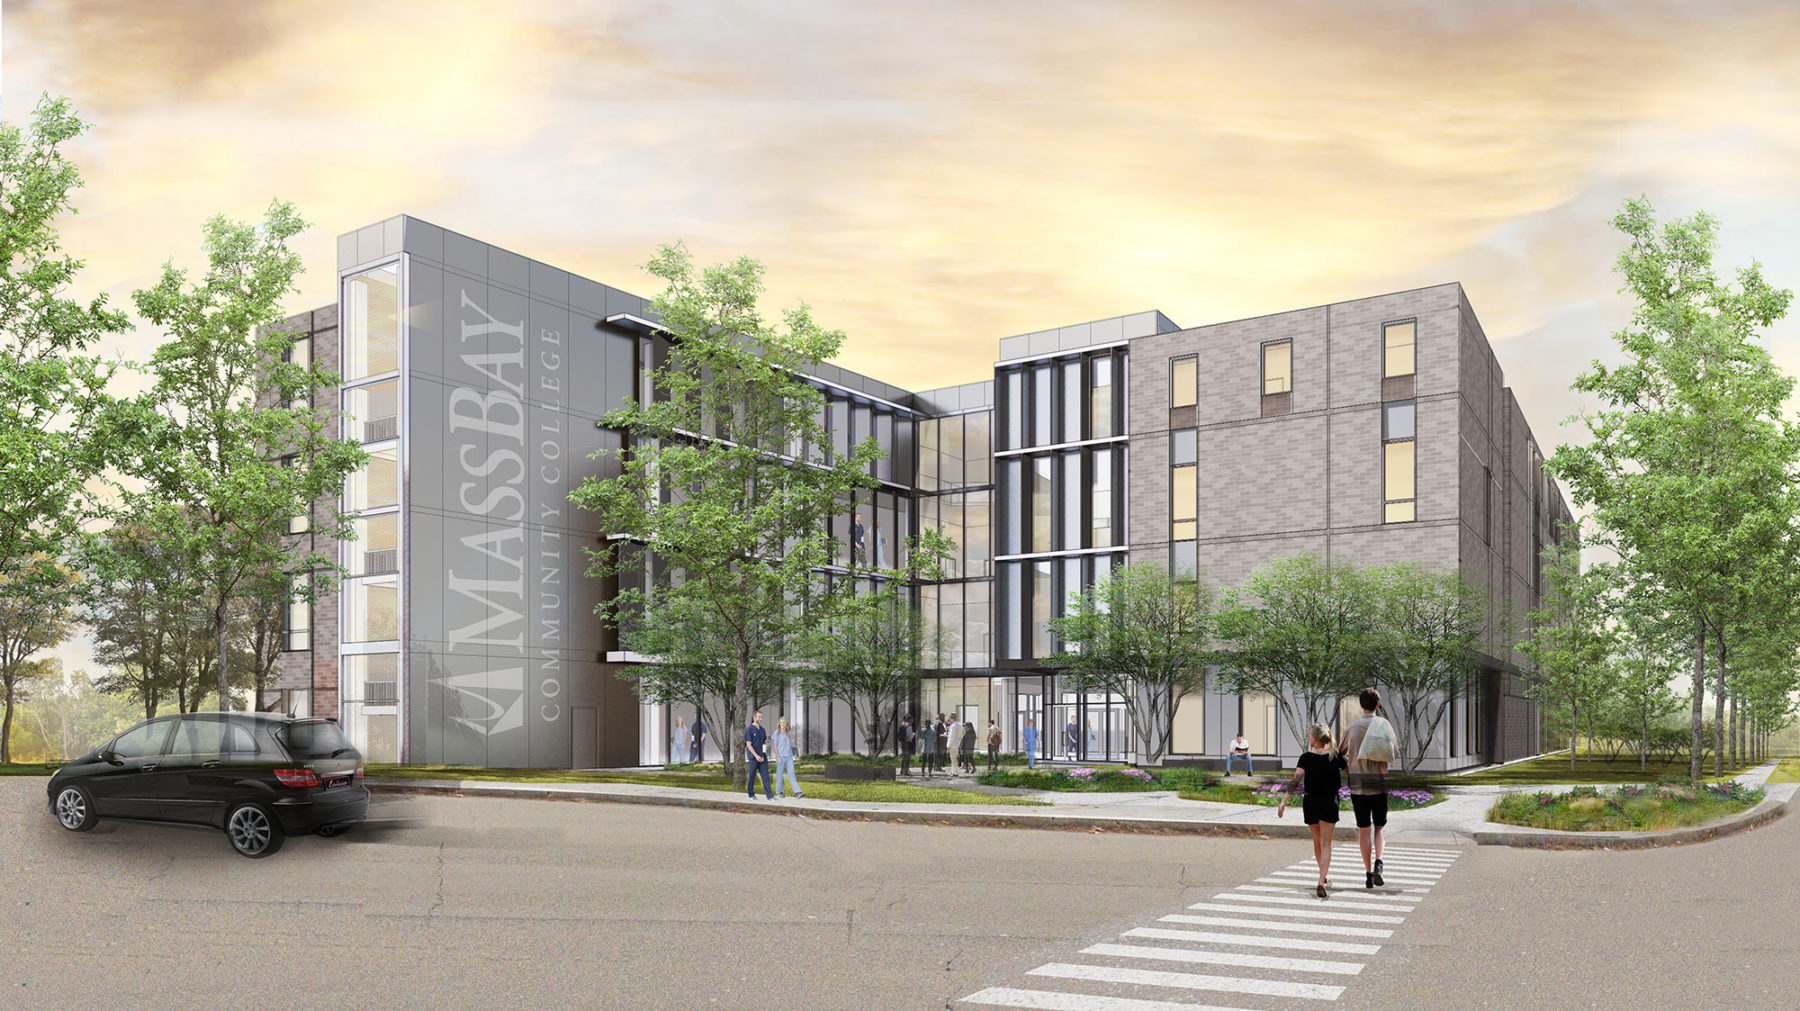 exterior rendering of mass bay community college building